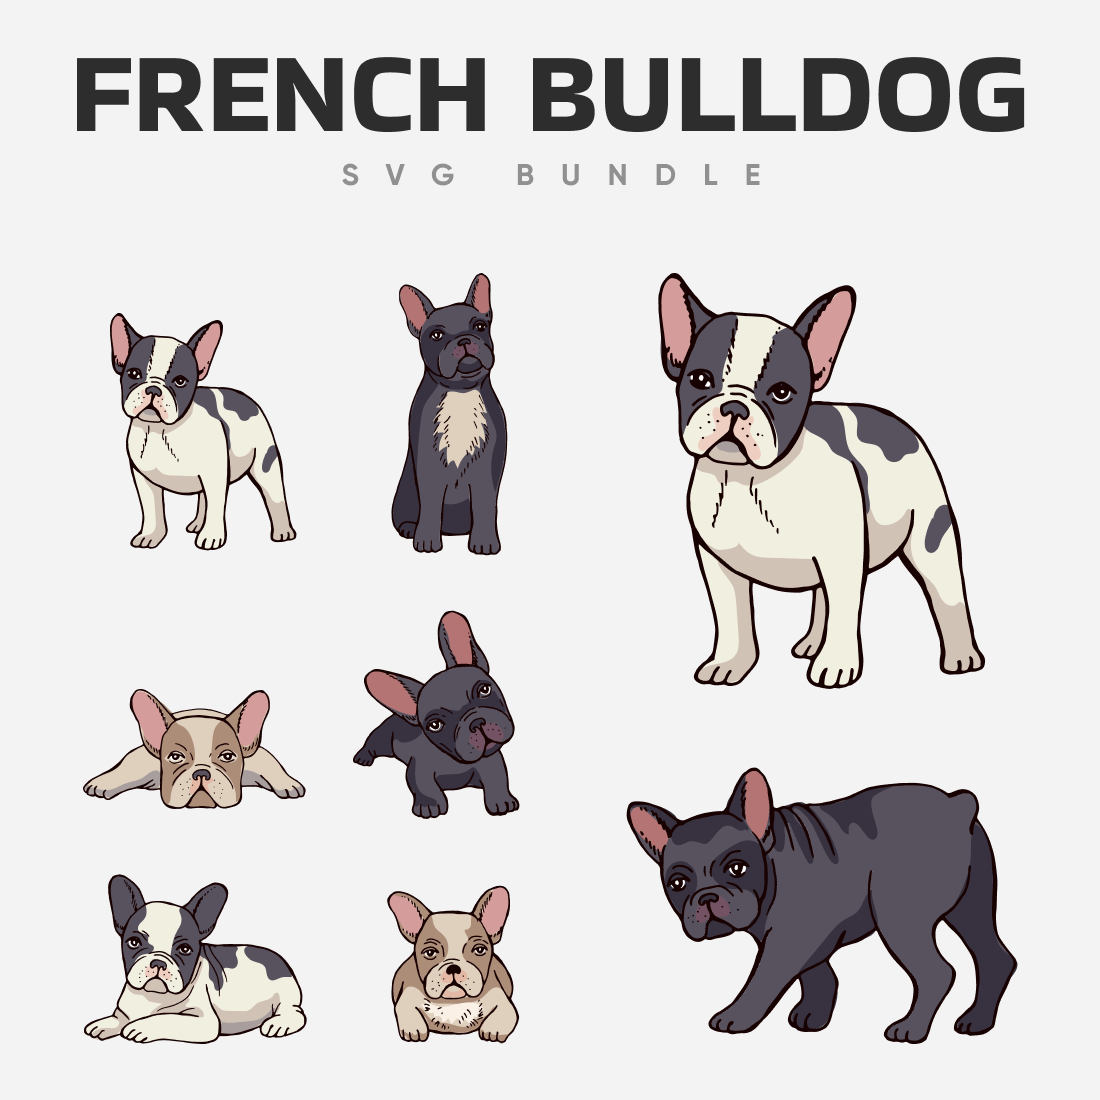 French bulldogs with different colors and cute faces.